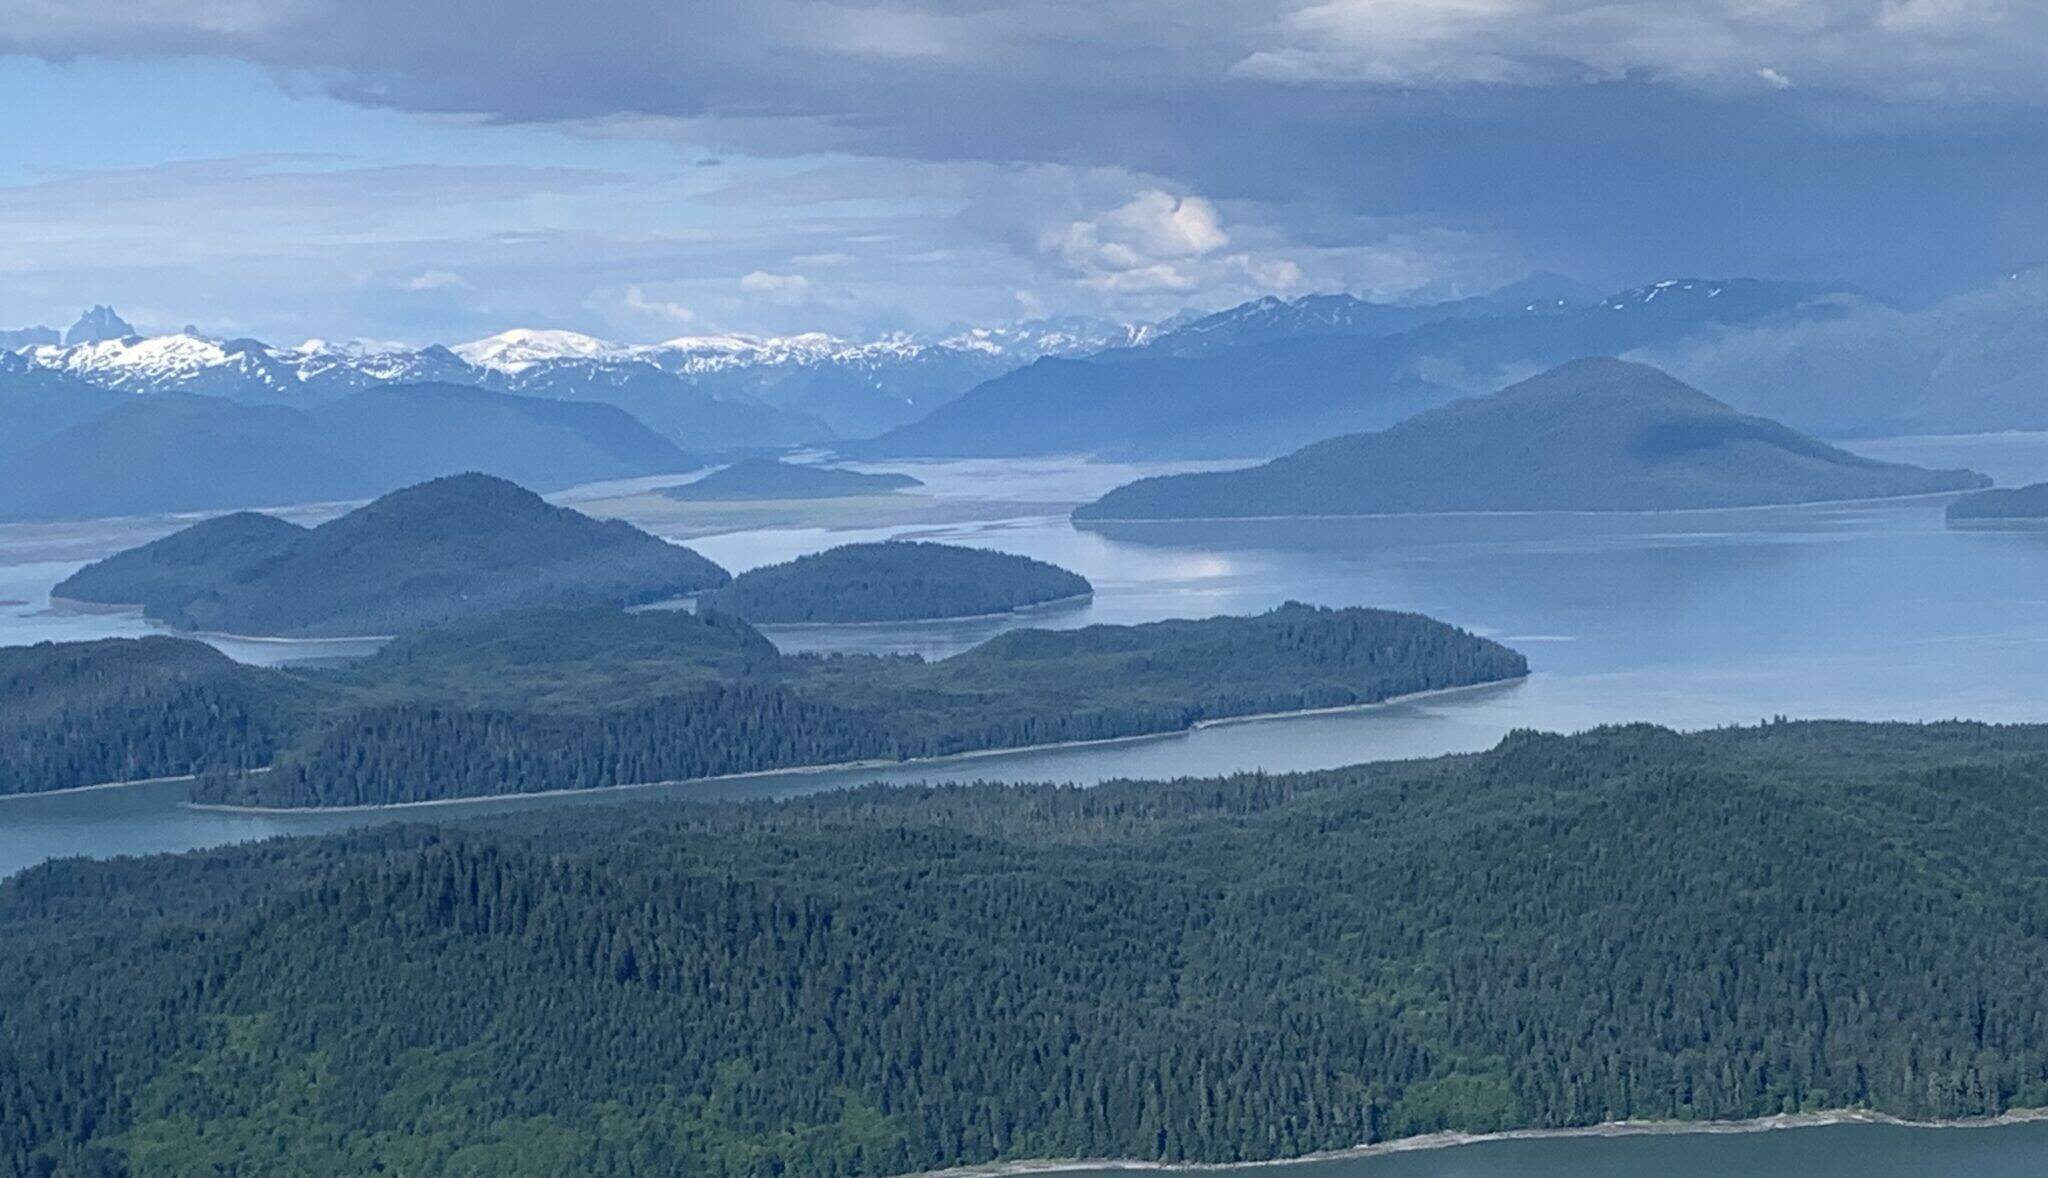 The Stikine River Flats area in the Tongass National Forest is viewed from a helicopter on July 19, 2021. The Stikine River flows from British Columbia to Southeast Alaska. It is one of the major transboundary rivers impacted by mines in British Columbia. (Photo by Alicia Stearns/U.S. Forest Service)